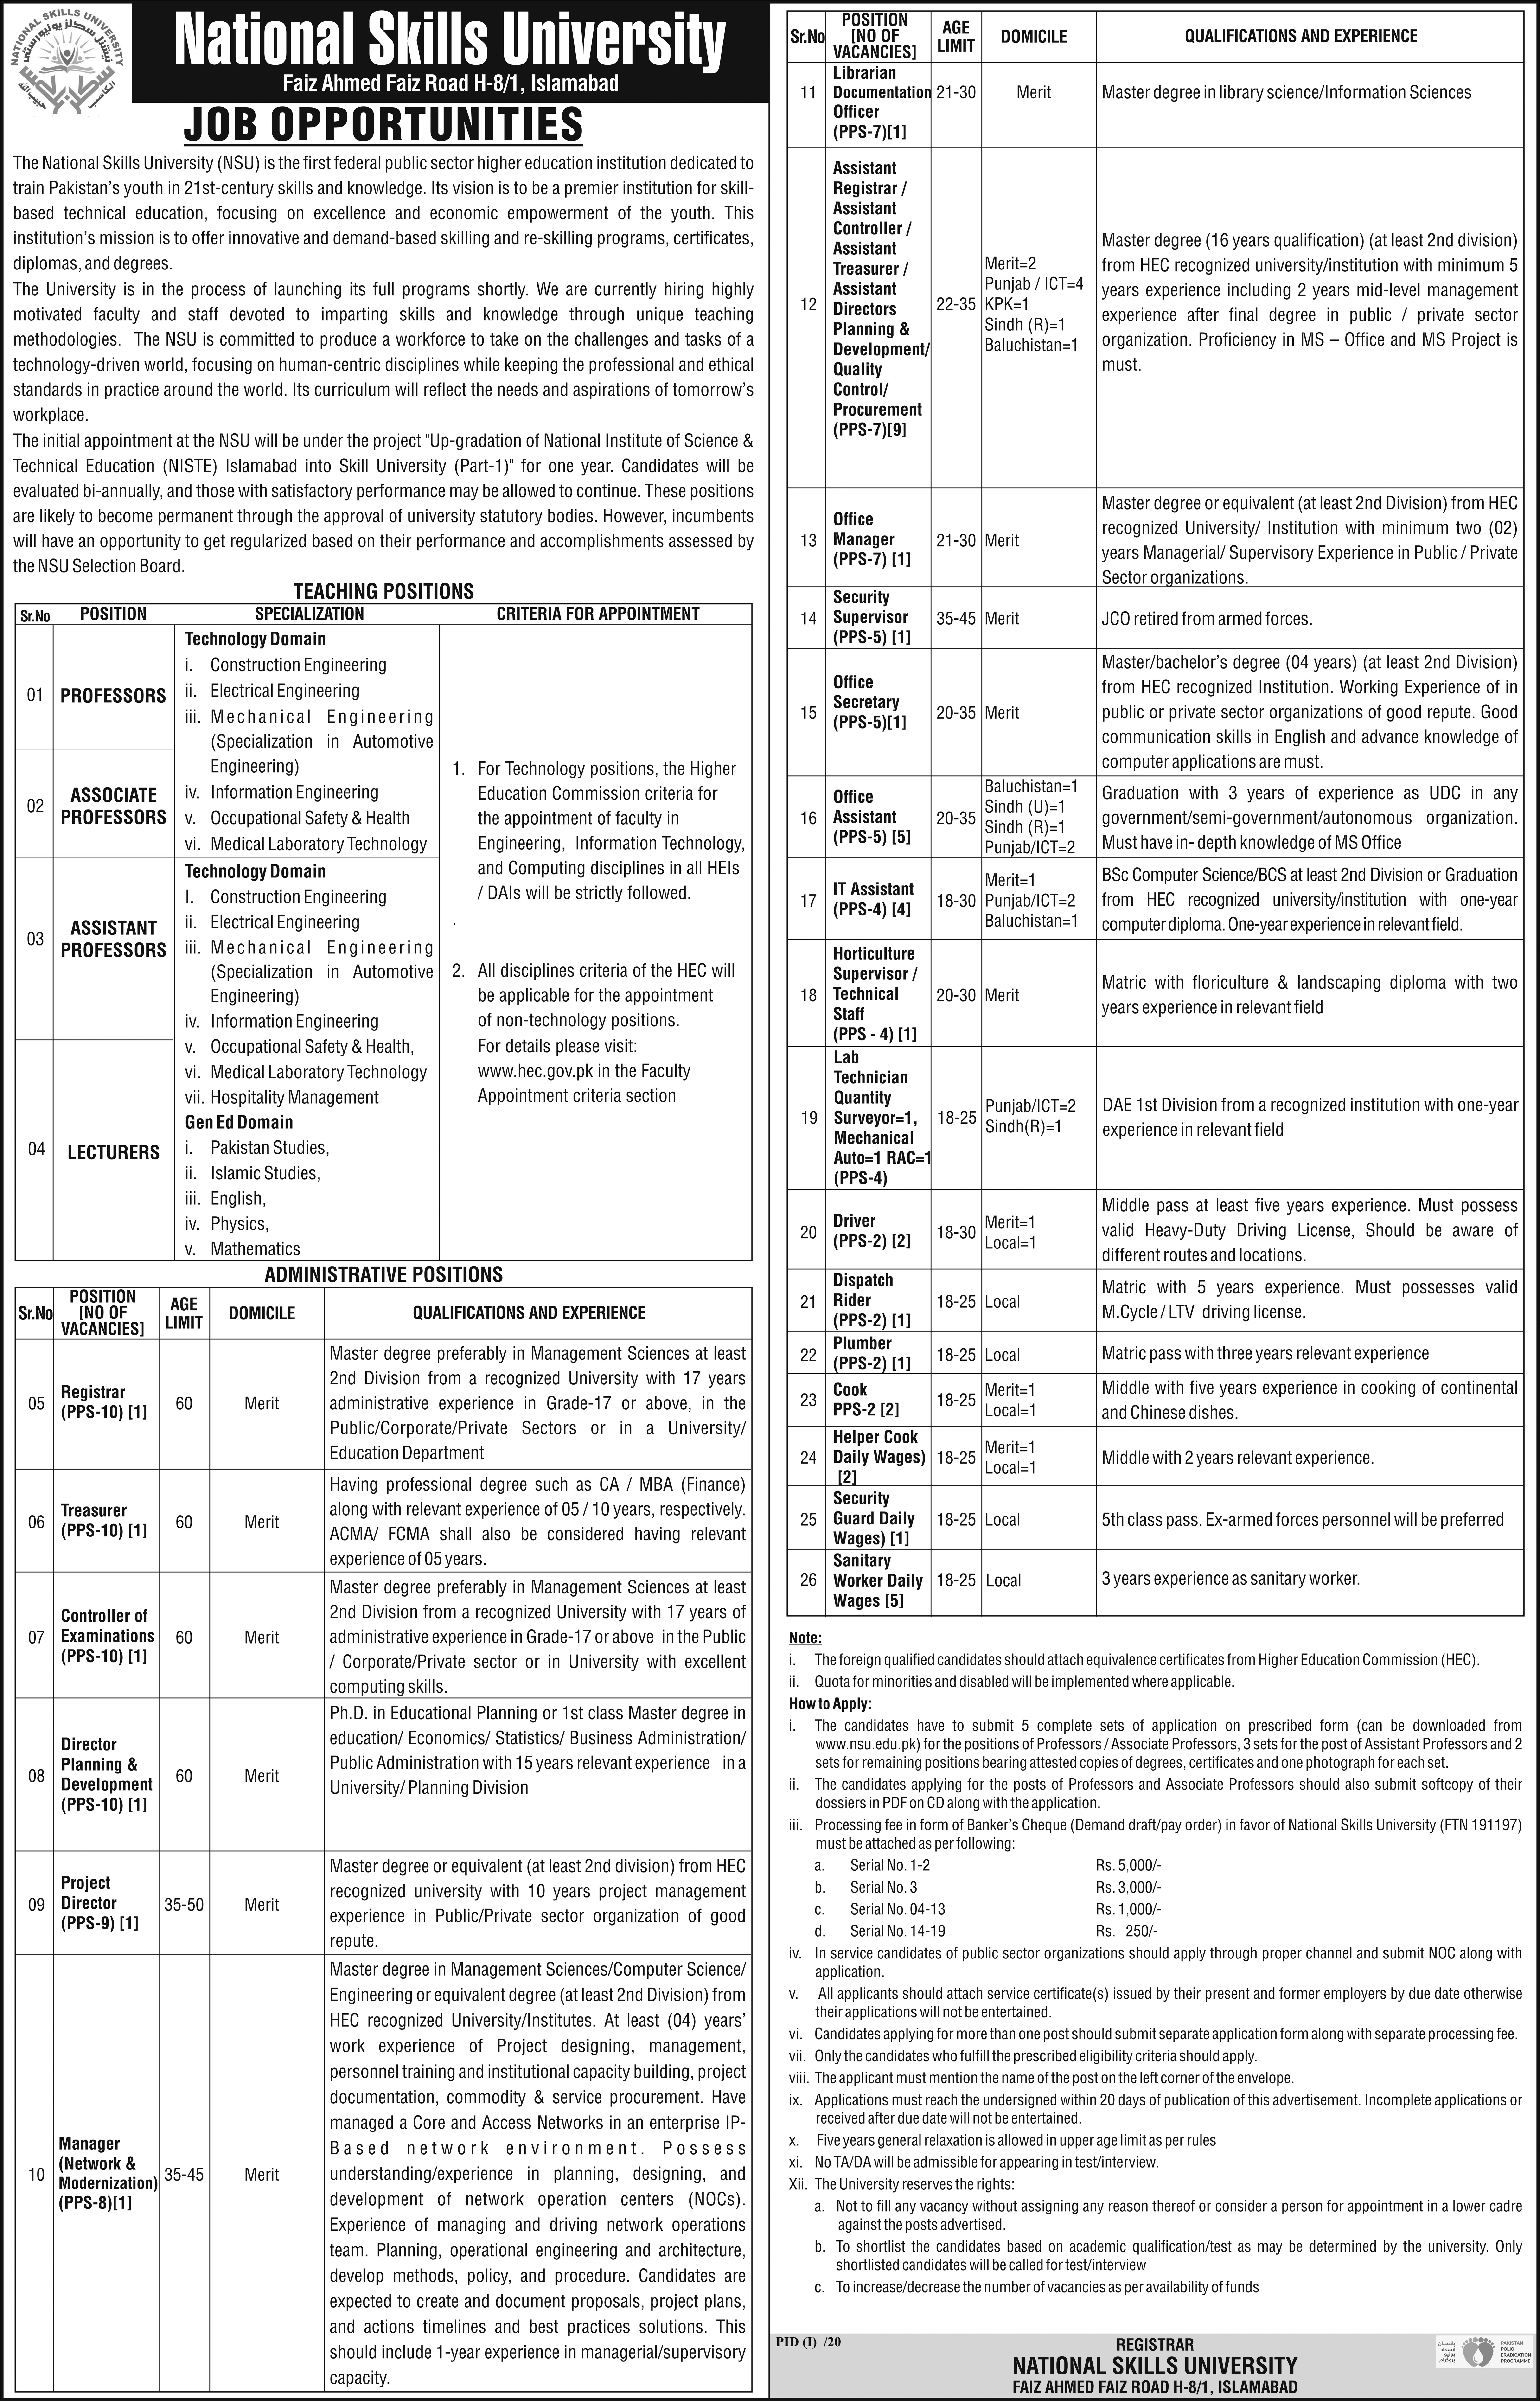 National Skills University Islamabad Jobs November 2020 Application Form Teaching Faculty & Others Latest